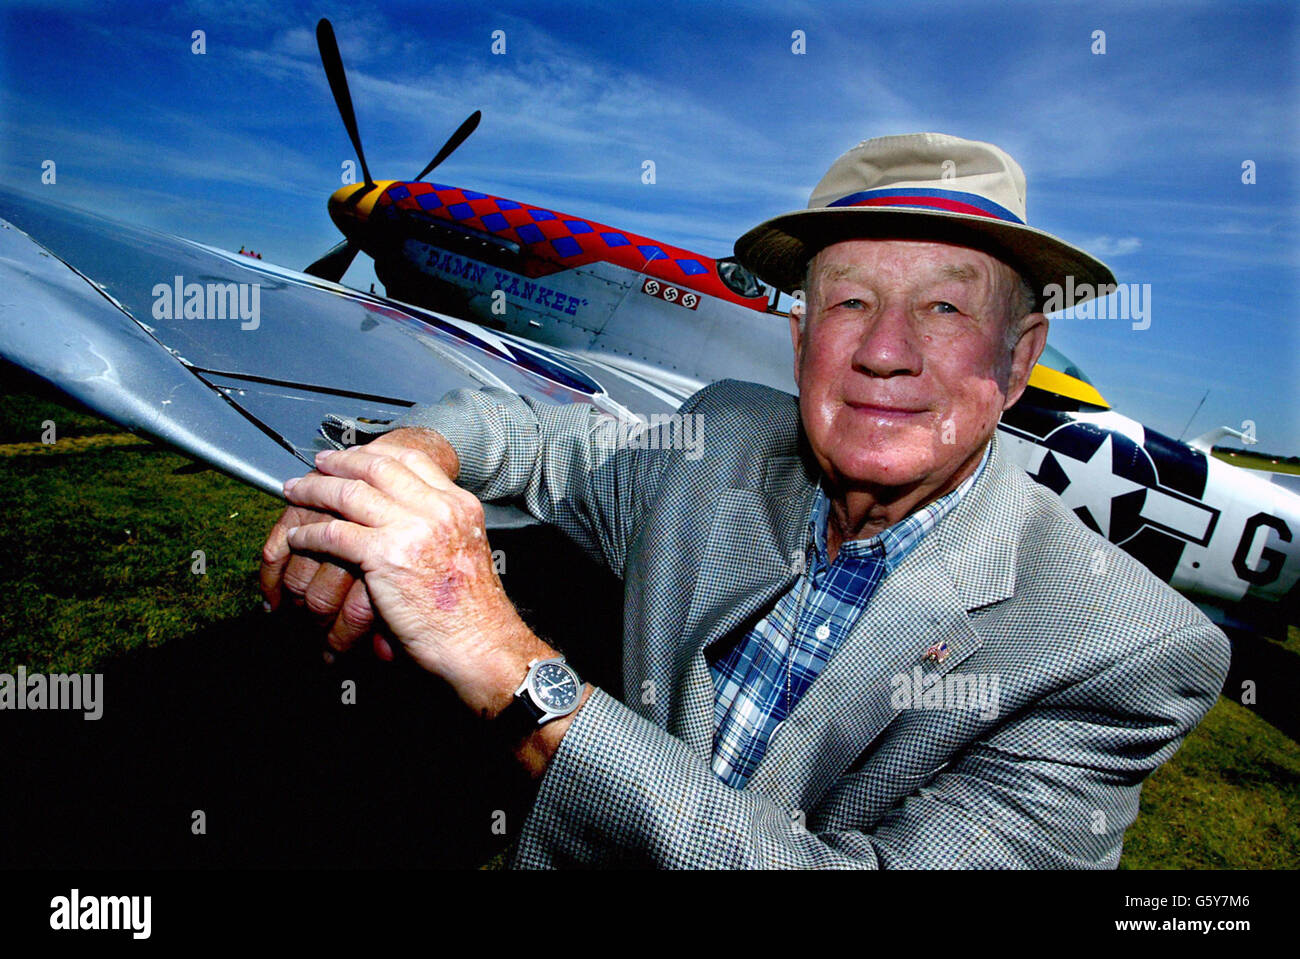 Major General Donald J Strait, former Second World War pilot of the 356th Fighter Group, who shot down 13.5 enemy aircraft, stands in front of a P-51 Mustang at the Flying Legends Airshow, RAF Duxford, Cambridgeshire. Thousands of aviation enthusiasts and families visited the second day of an annual showcase of First and Second World War aircraft, featuring dozens of aircraft, pilots and combat veterans from across the world. Stock Photo